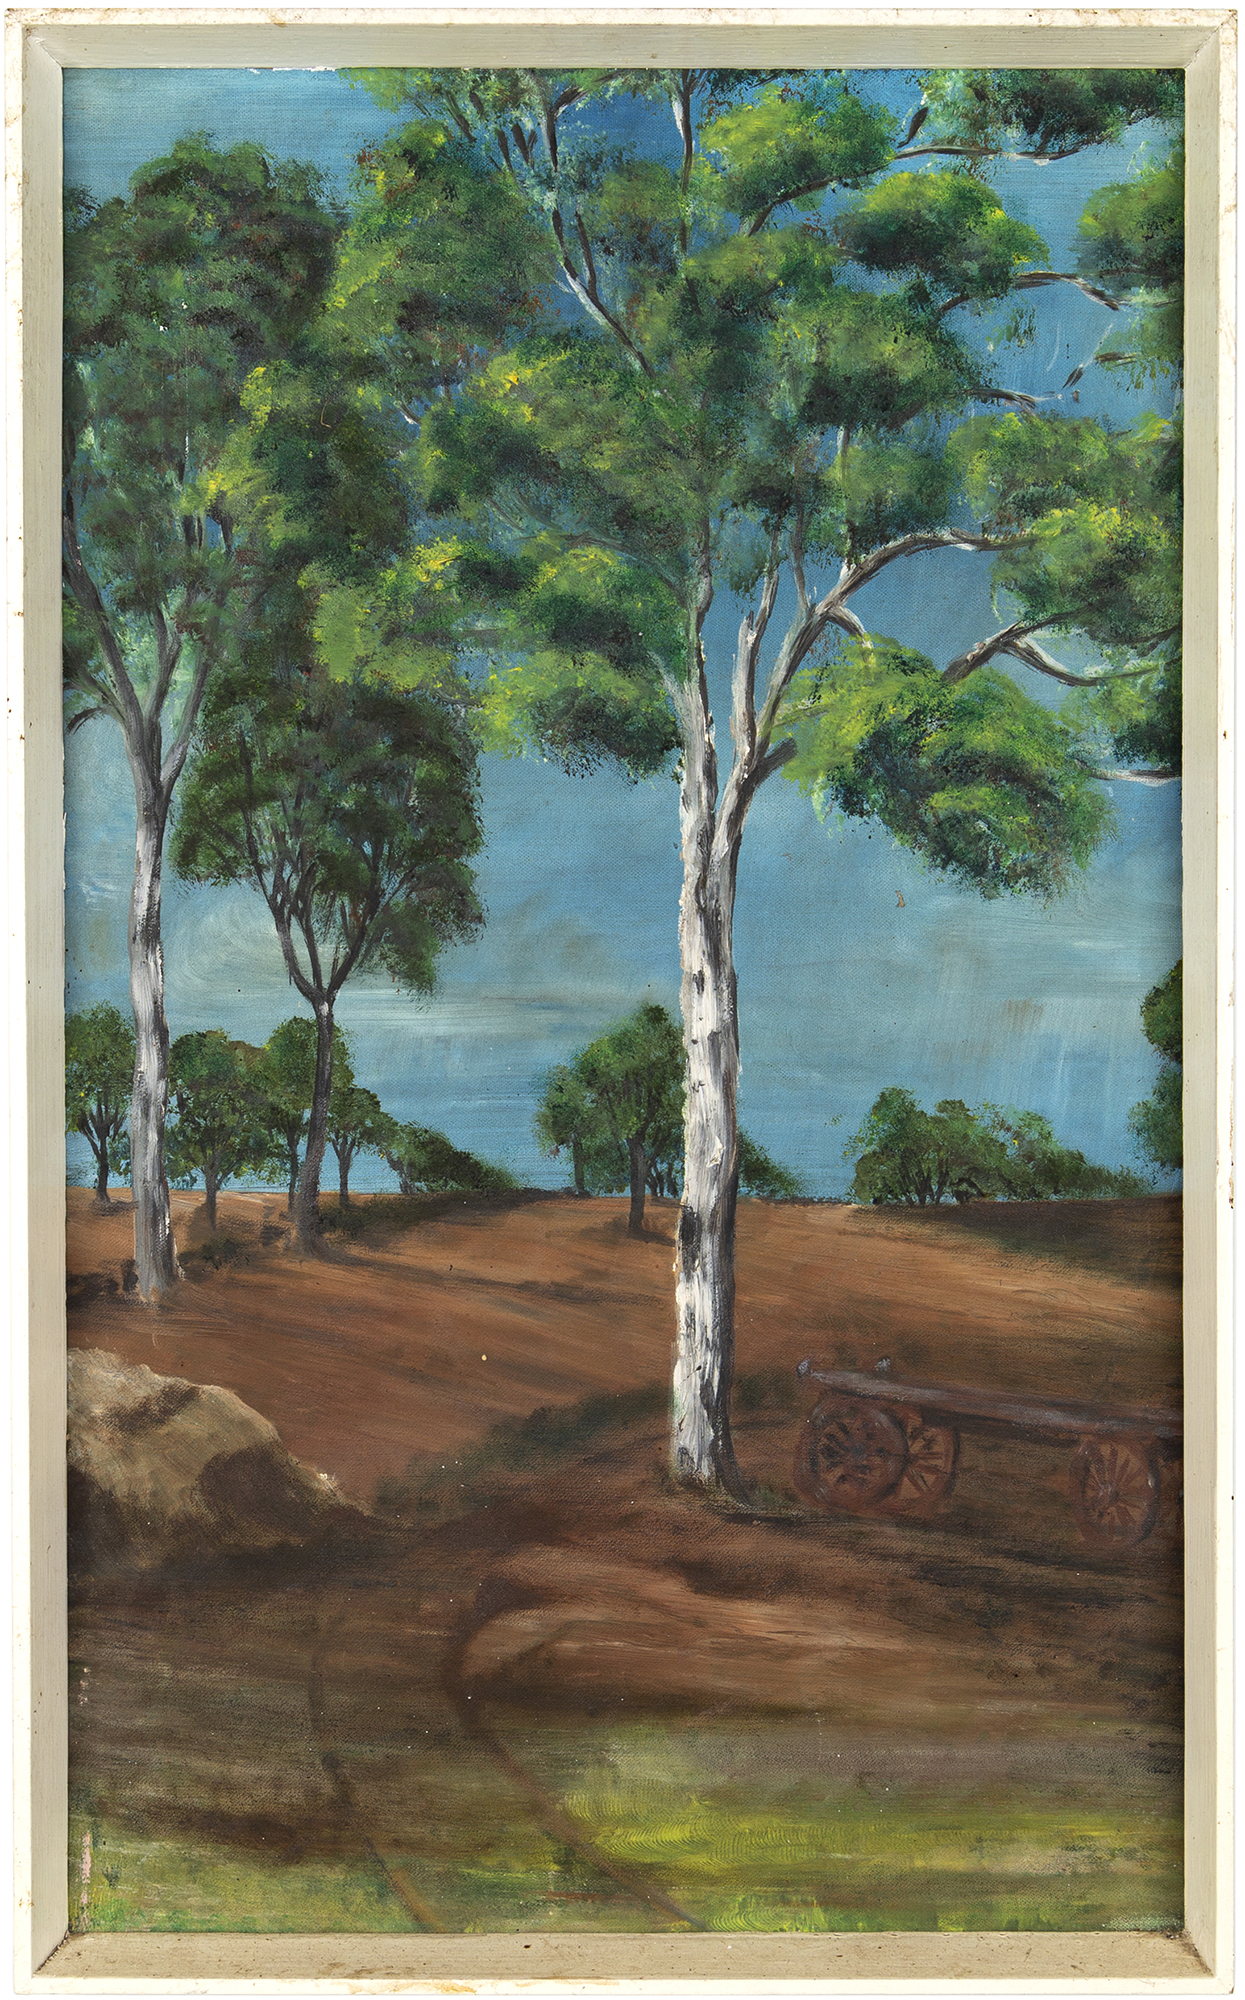 Realistic-looking landscape painting depicting a tree with a white trunk in the foreground on a sloping brown and green hill and multiple, smaller trees in the background against a turquoise blue sky.